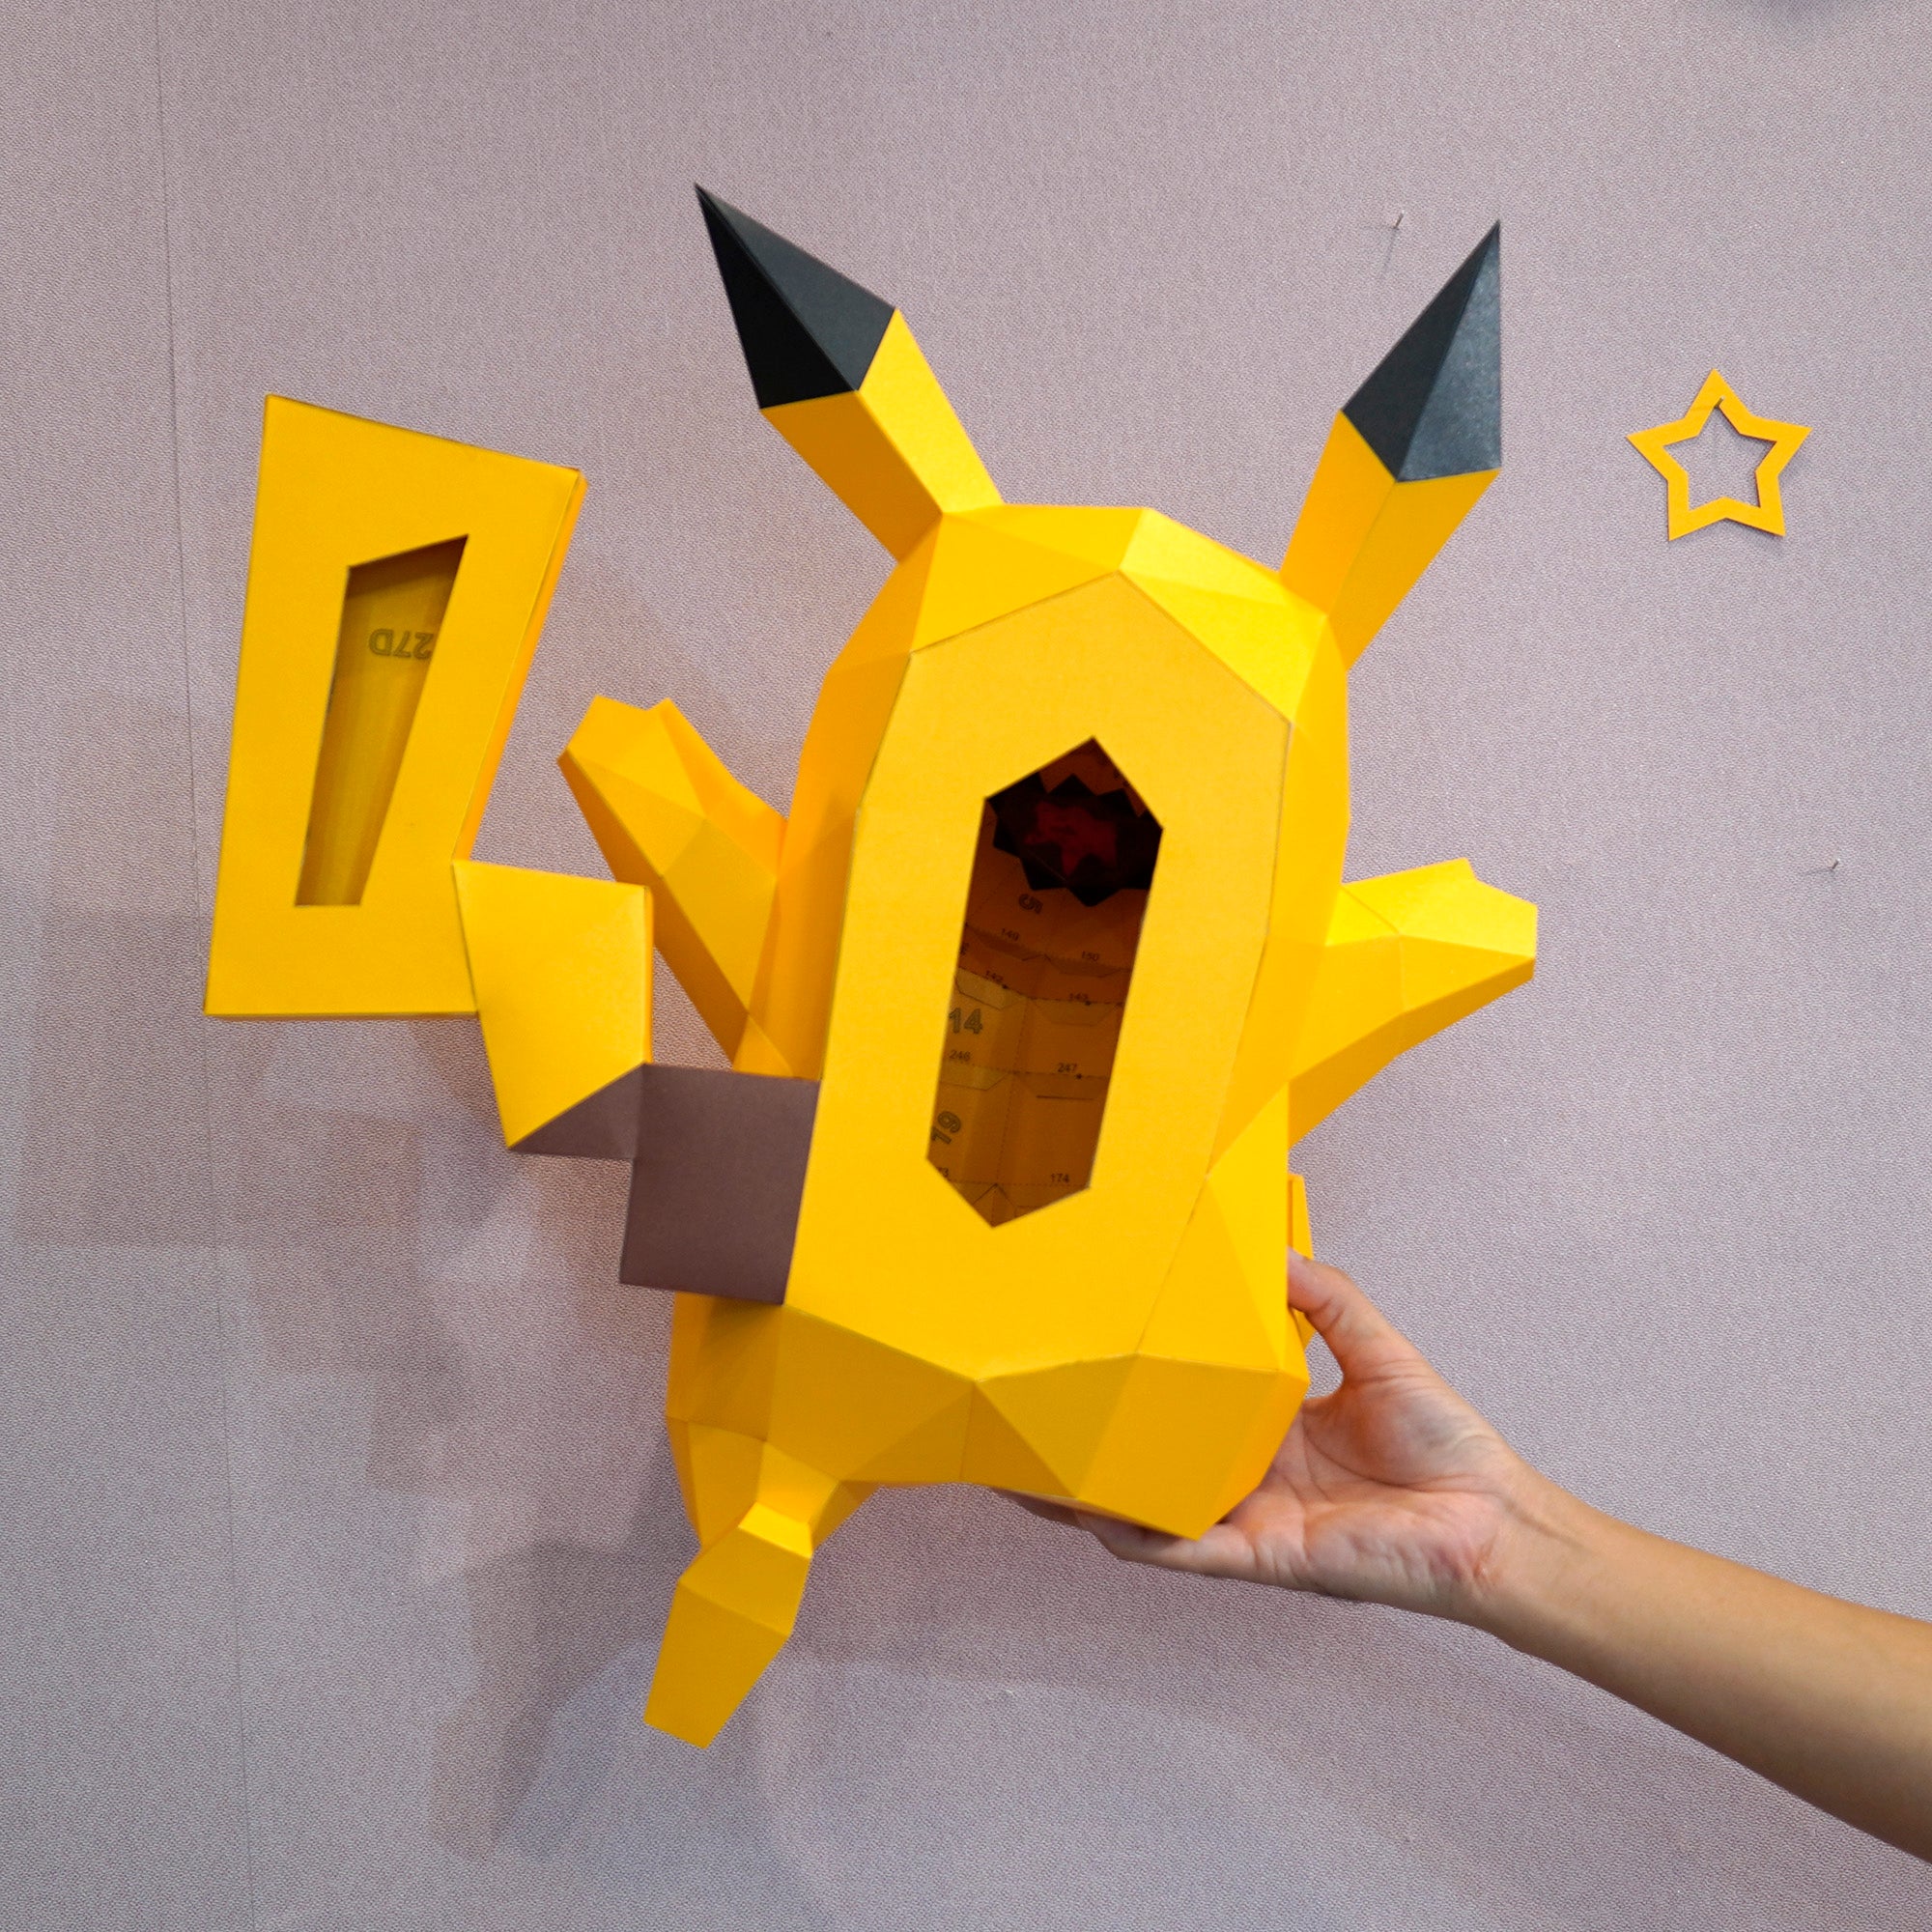 3D Pikachu Wall Hanging Papercraft PDF, SVG Template Compatible with Cricut, Cameo 4, Scanncut